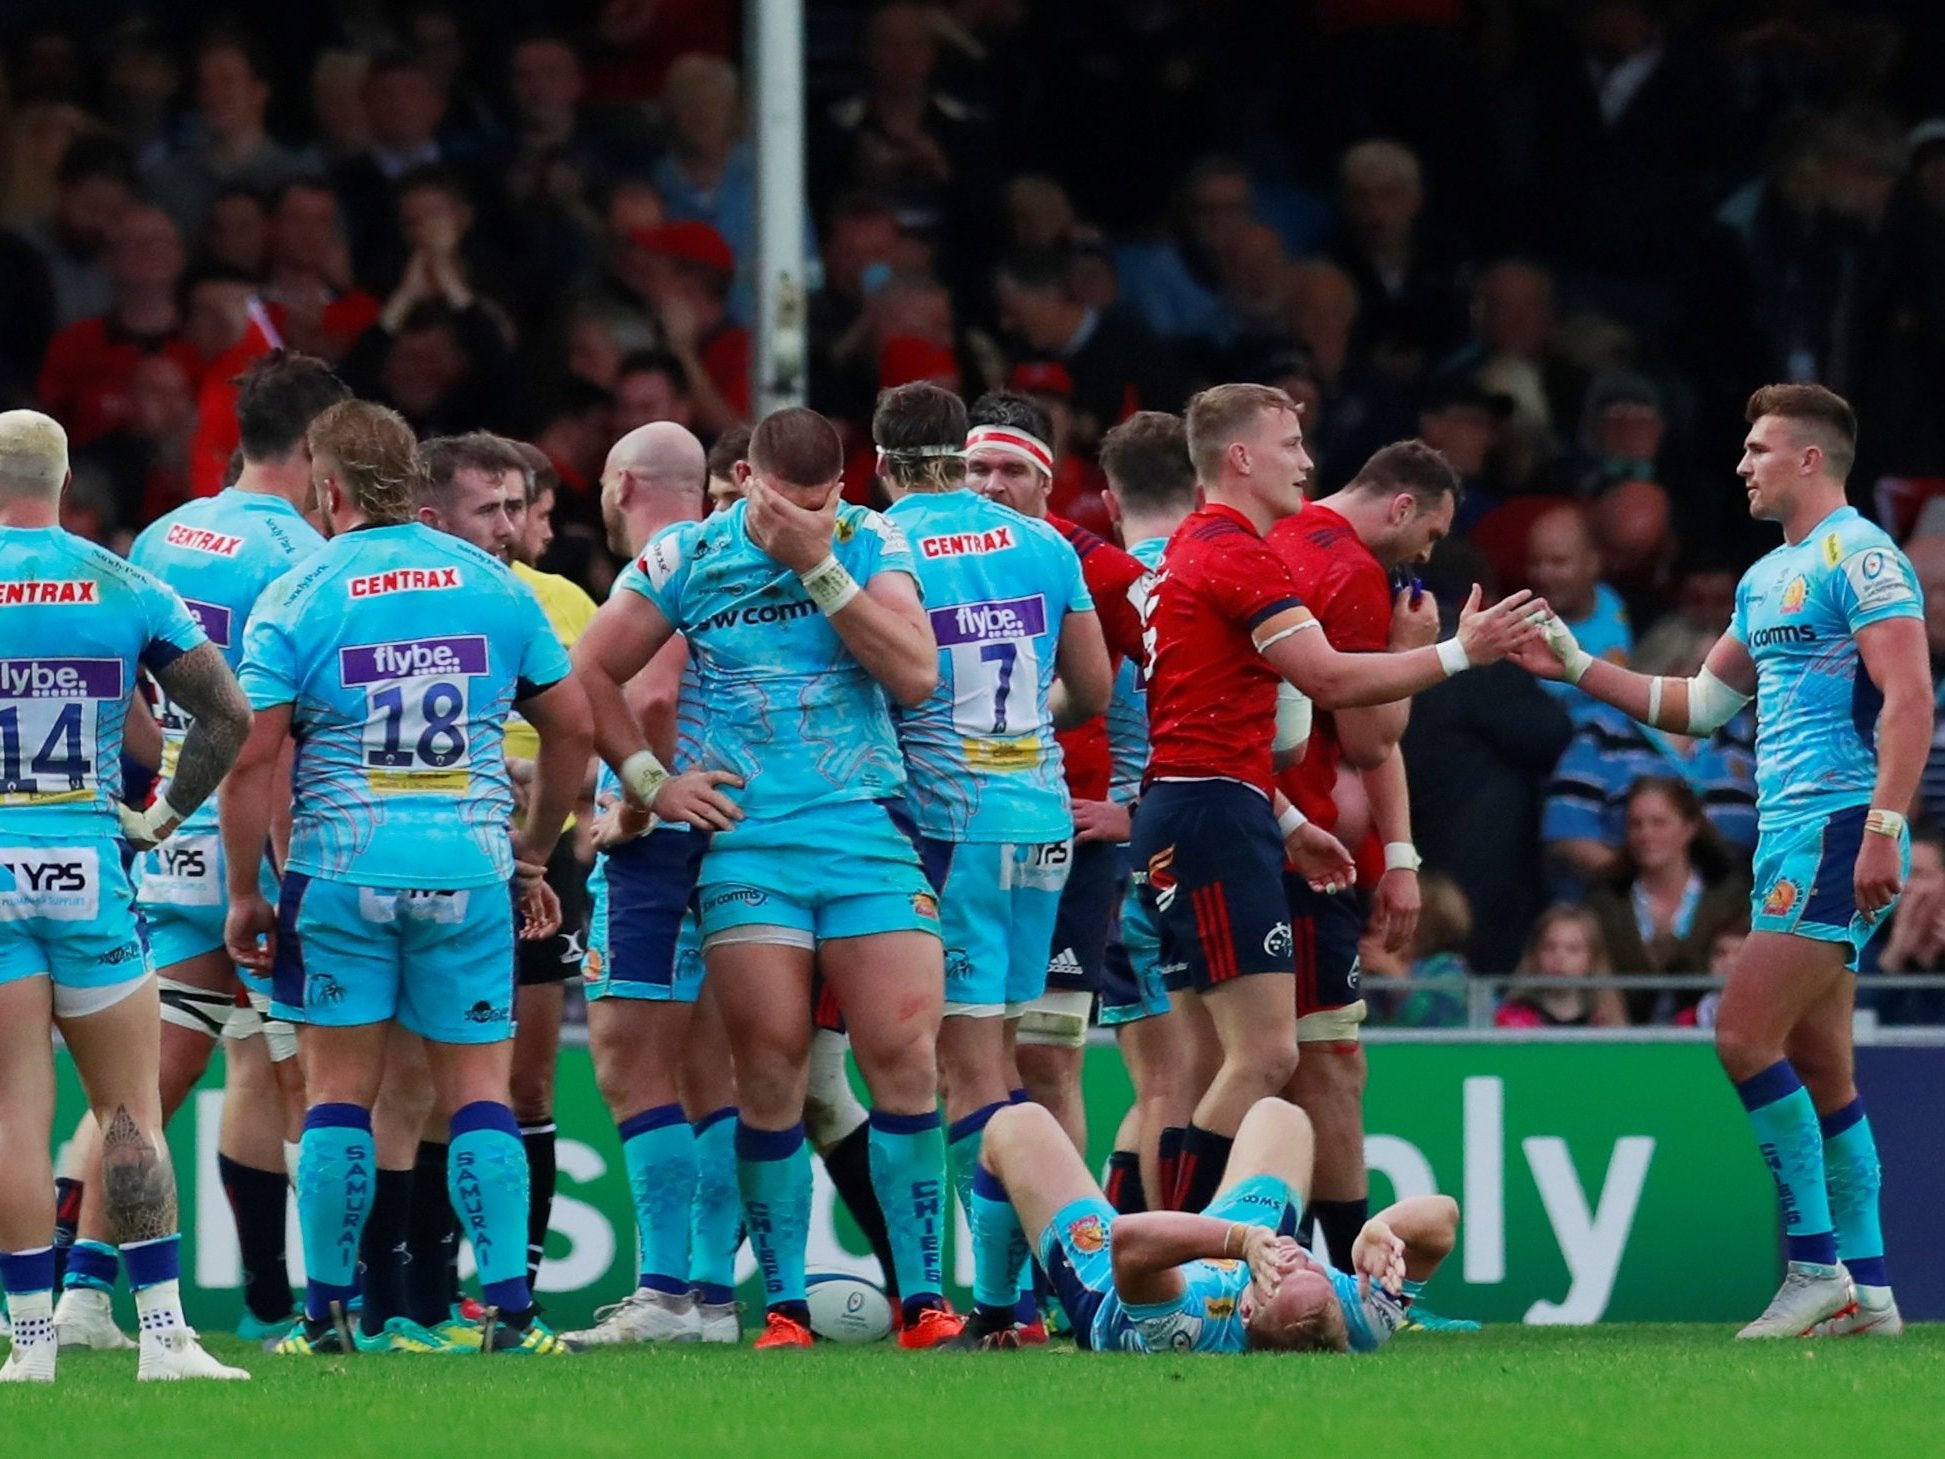 Exeter may rue the home draw against Munster later in the season